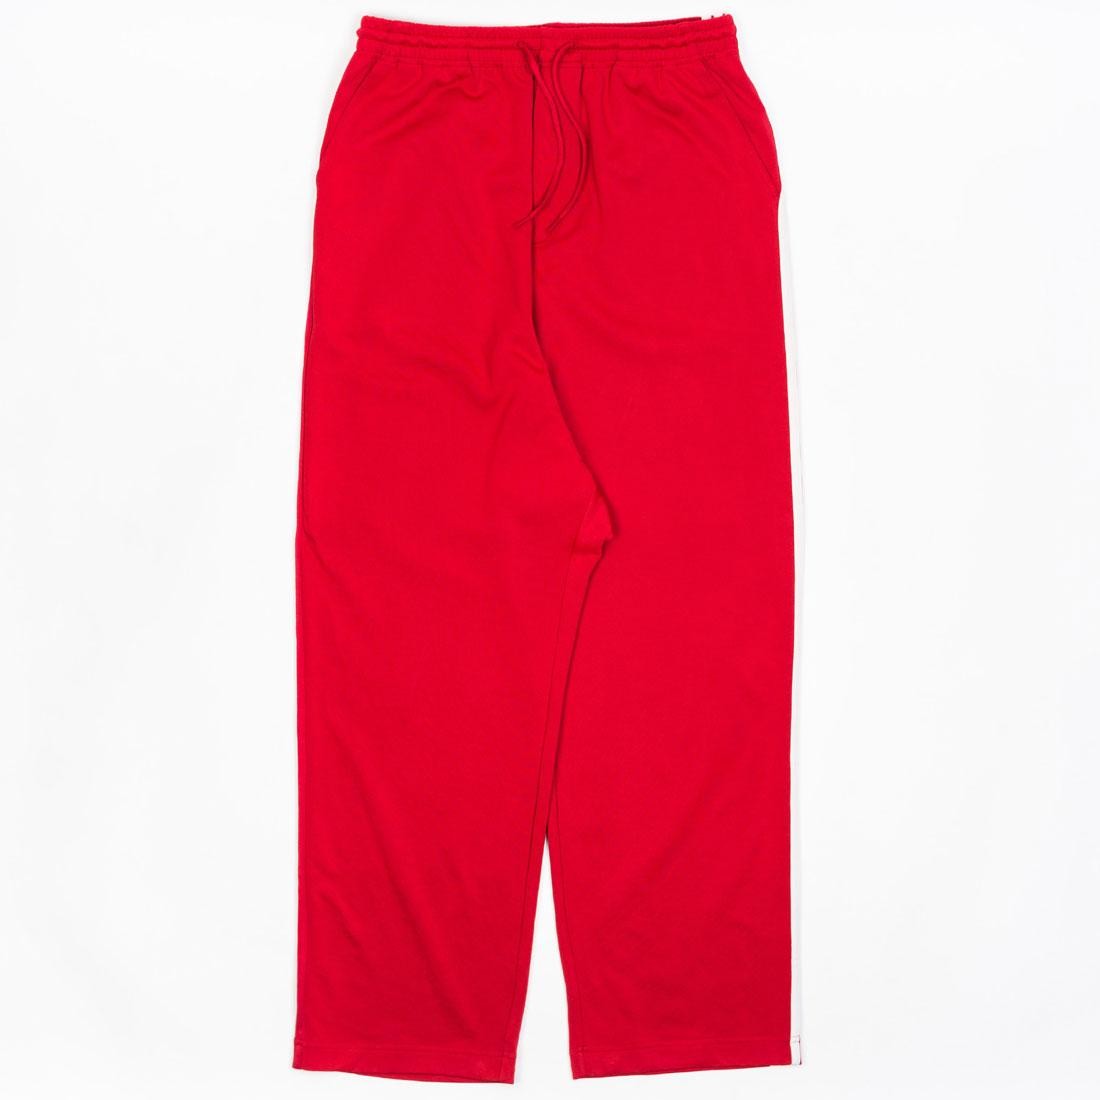 Adidas Y-3 Men 3-Stripes Wide Pants red chili pepper undyed